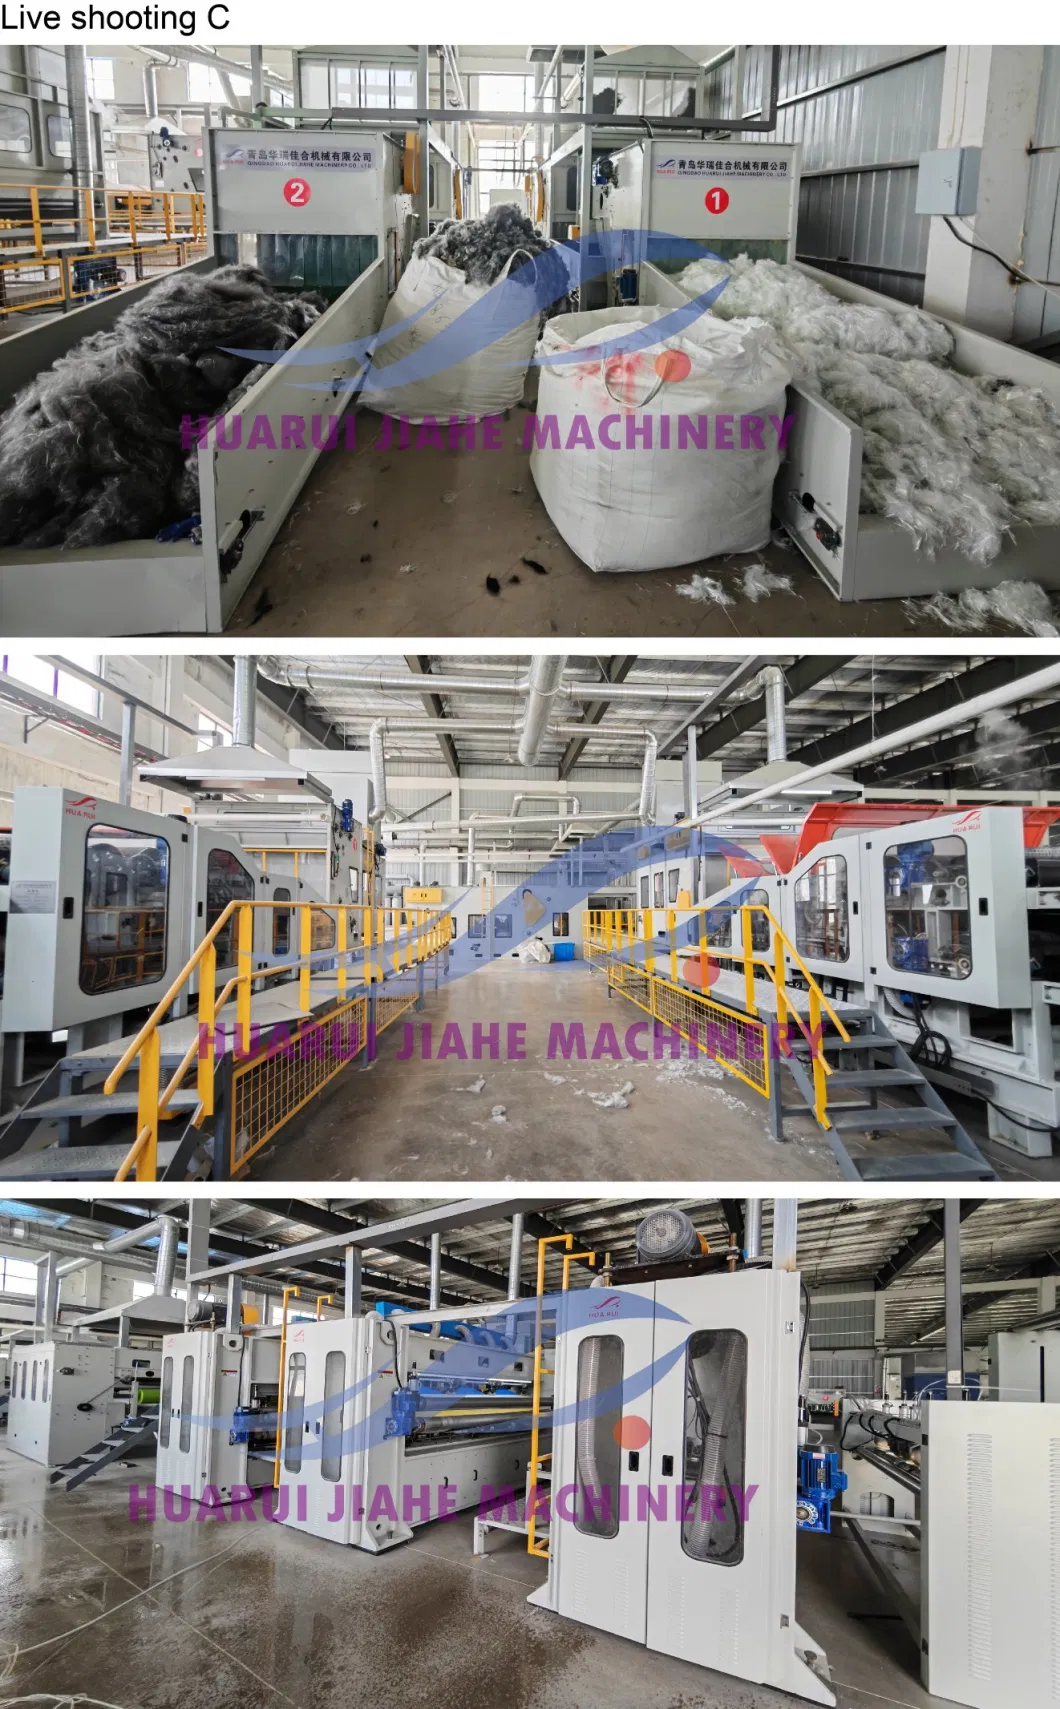 Nonwoven Polyester Suiting Fabric Babcock Stenter Machine for Camper Van Lining Carpet Car Floor, Carbon Fiber Needle Punched Cotton Boarding Stenter Machine